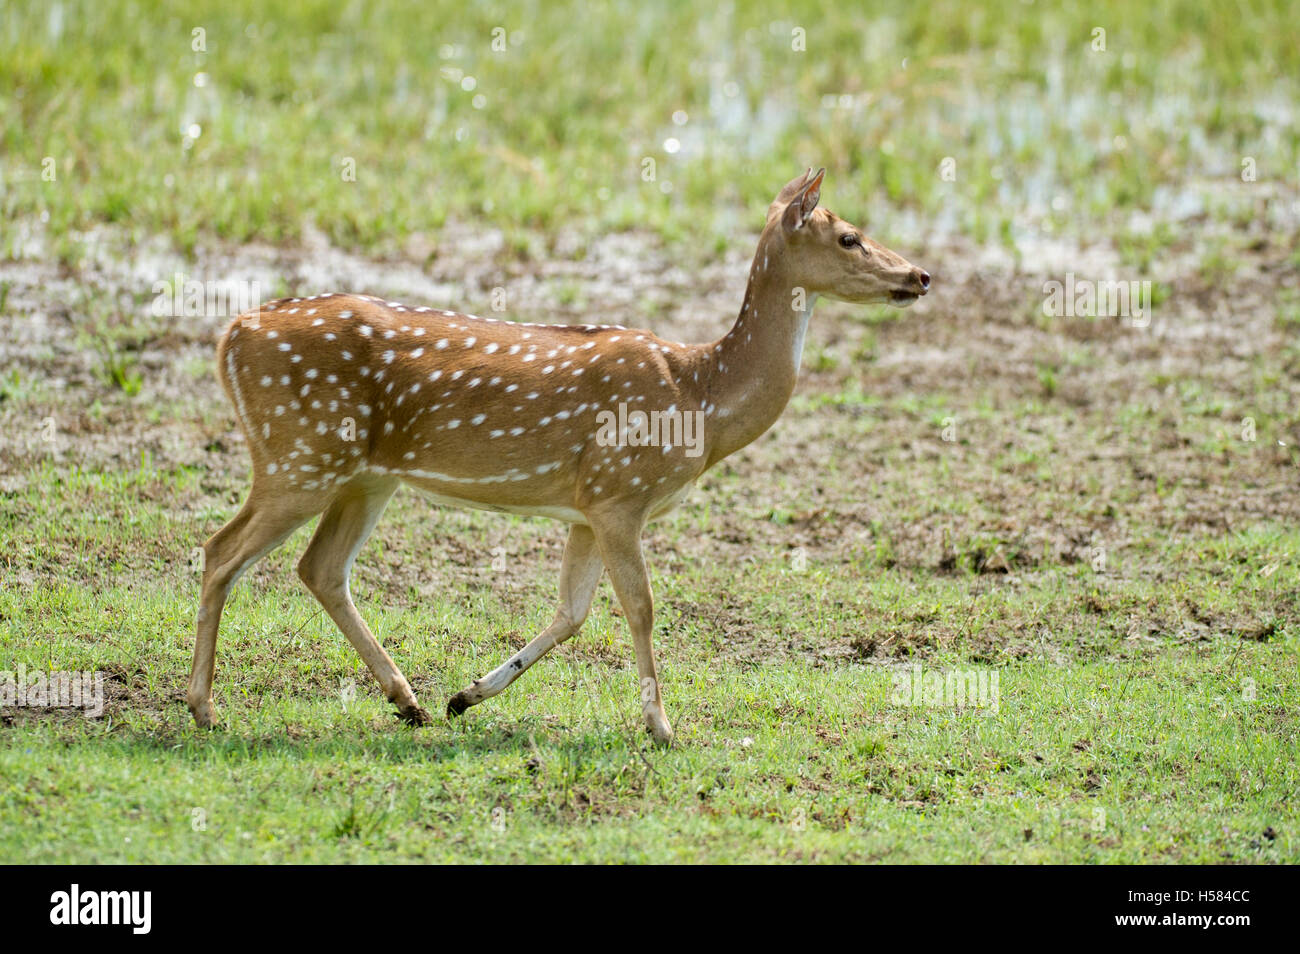 Spotted deer, Axis axis, Wilpattu National Park, Sri Lanka Stock Photo